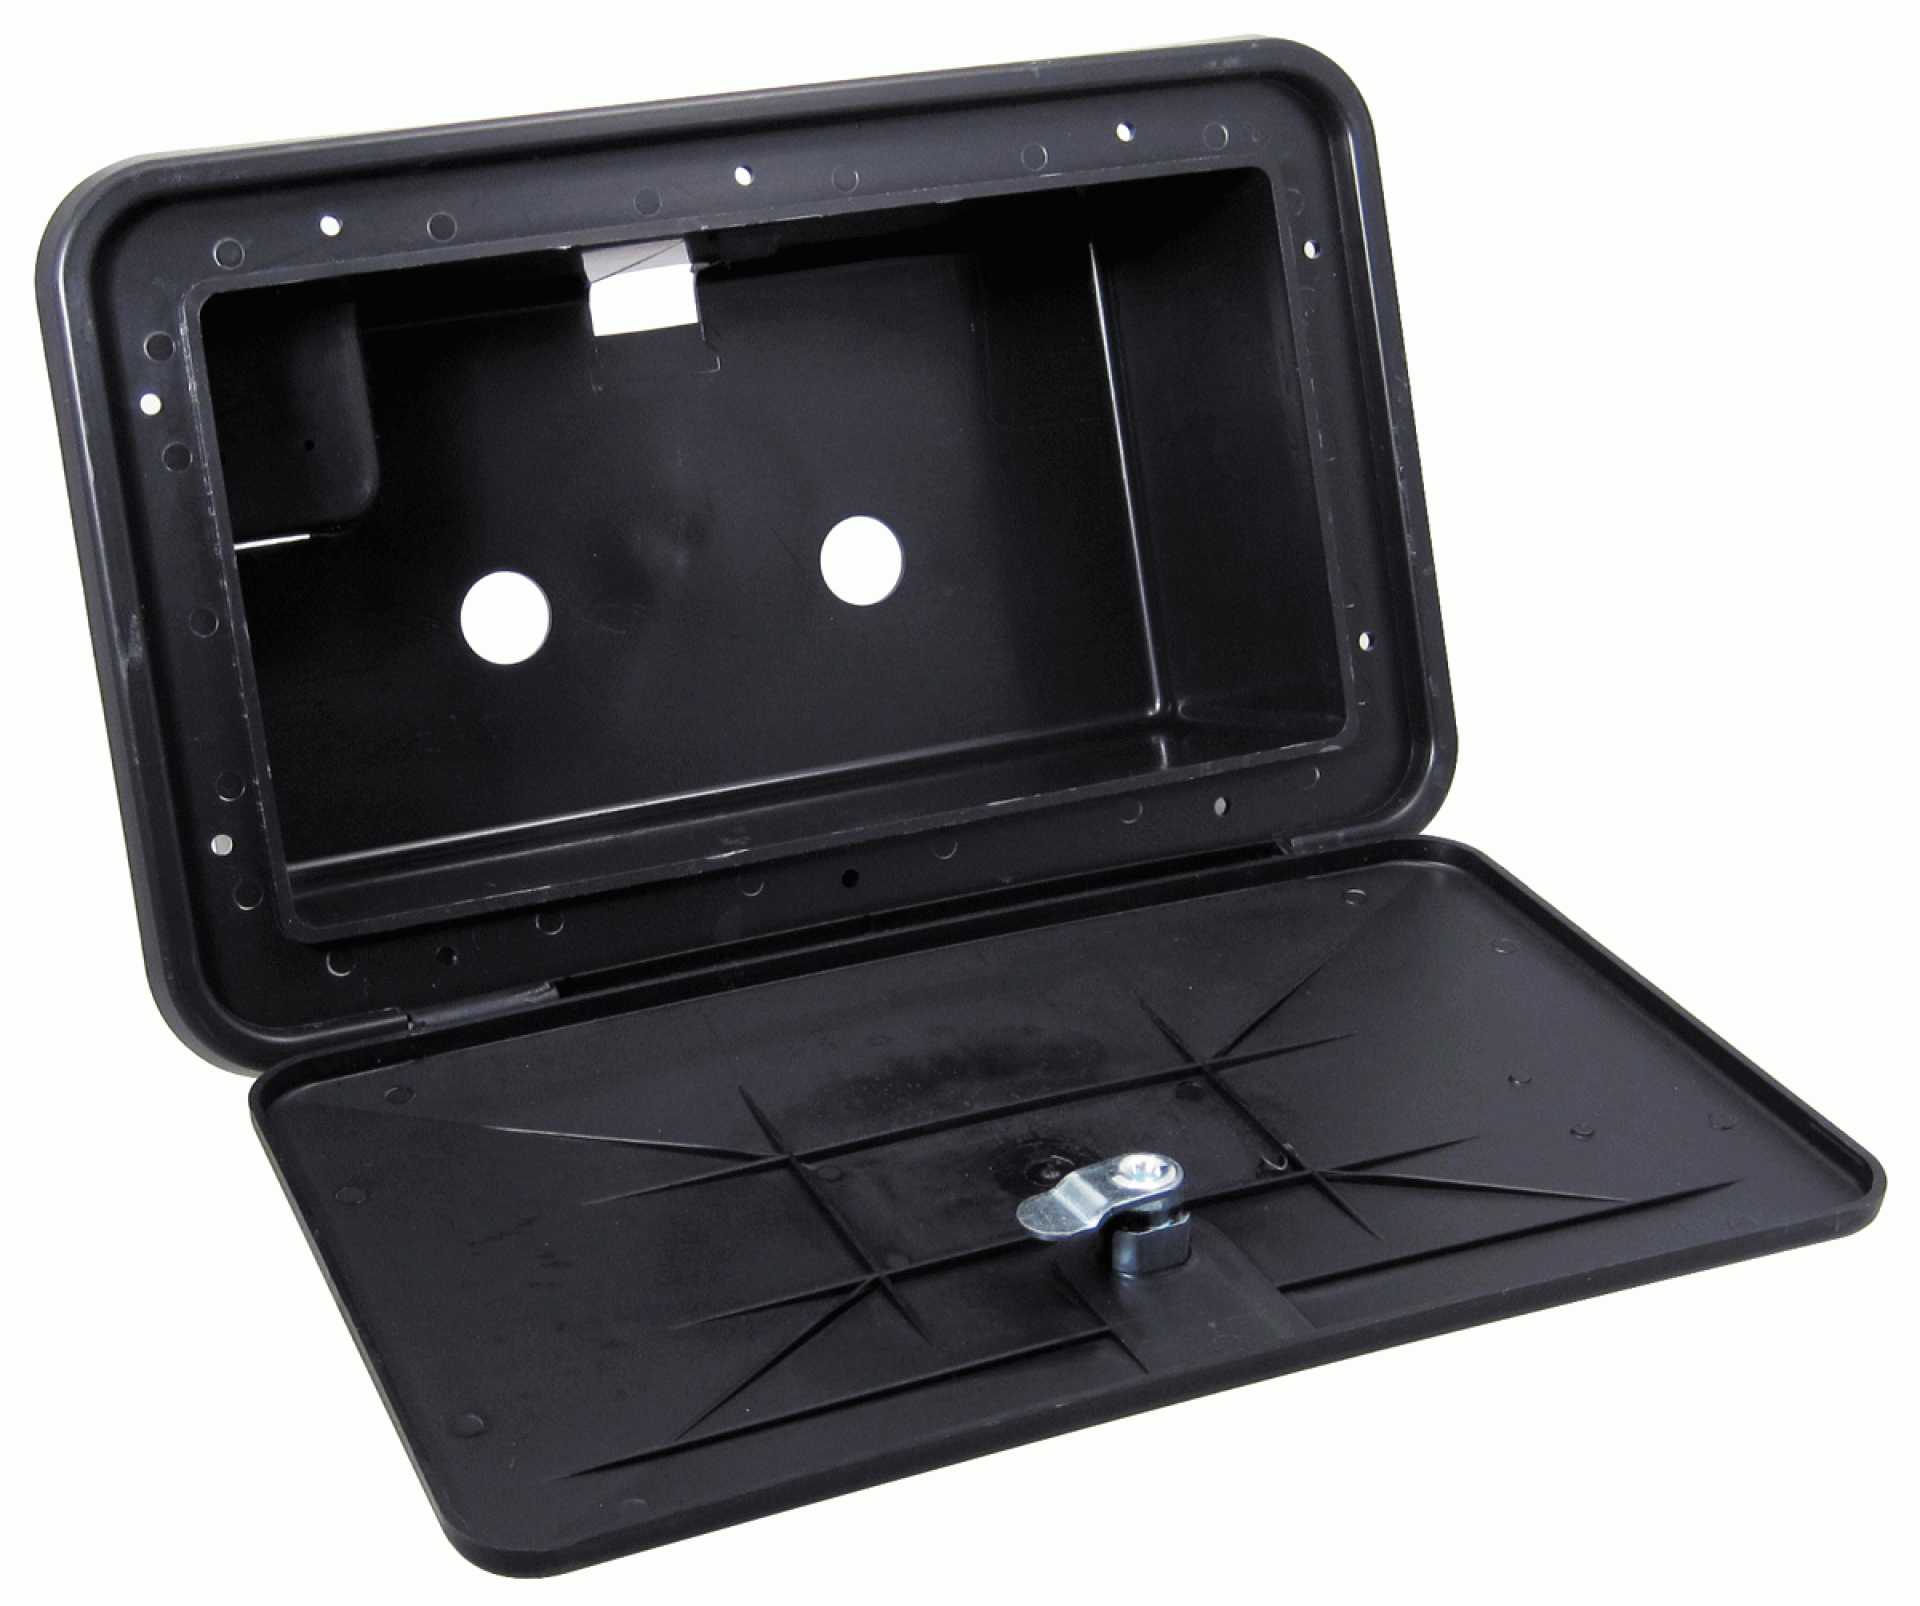 PHOENIX PRODUCTS INC. | PF267005 | EXTERIOR Shower Box Only - Black